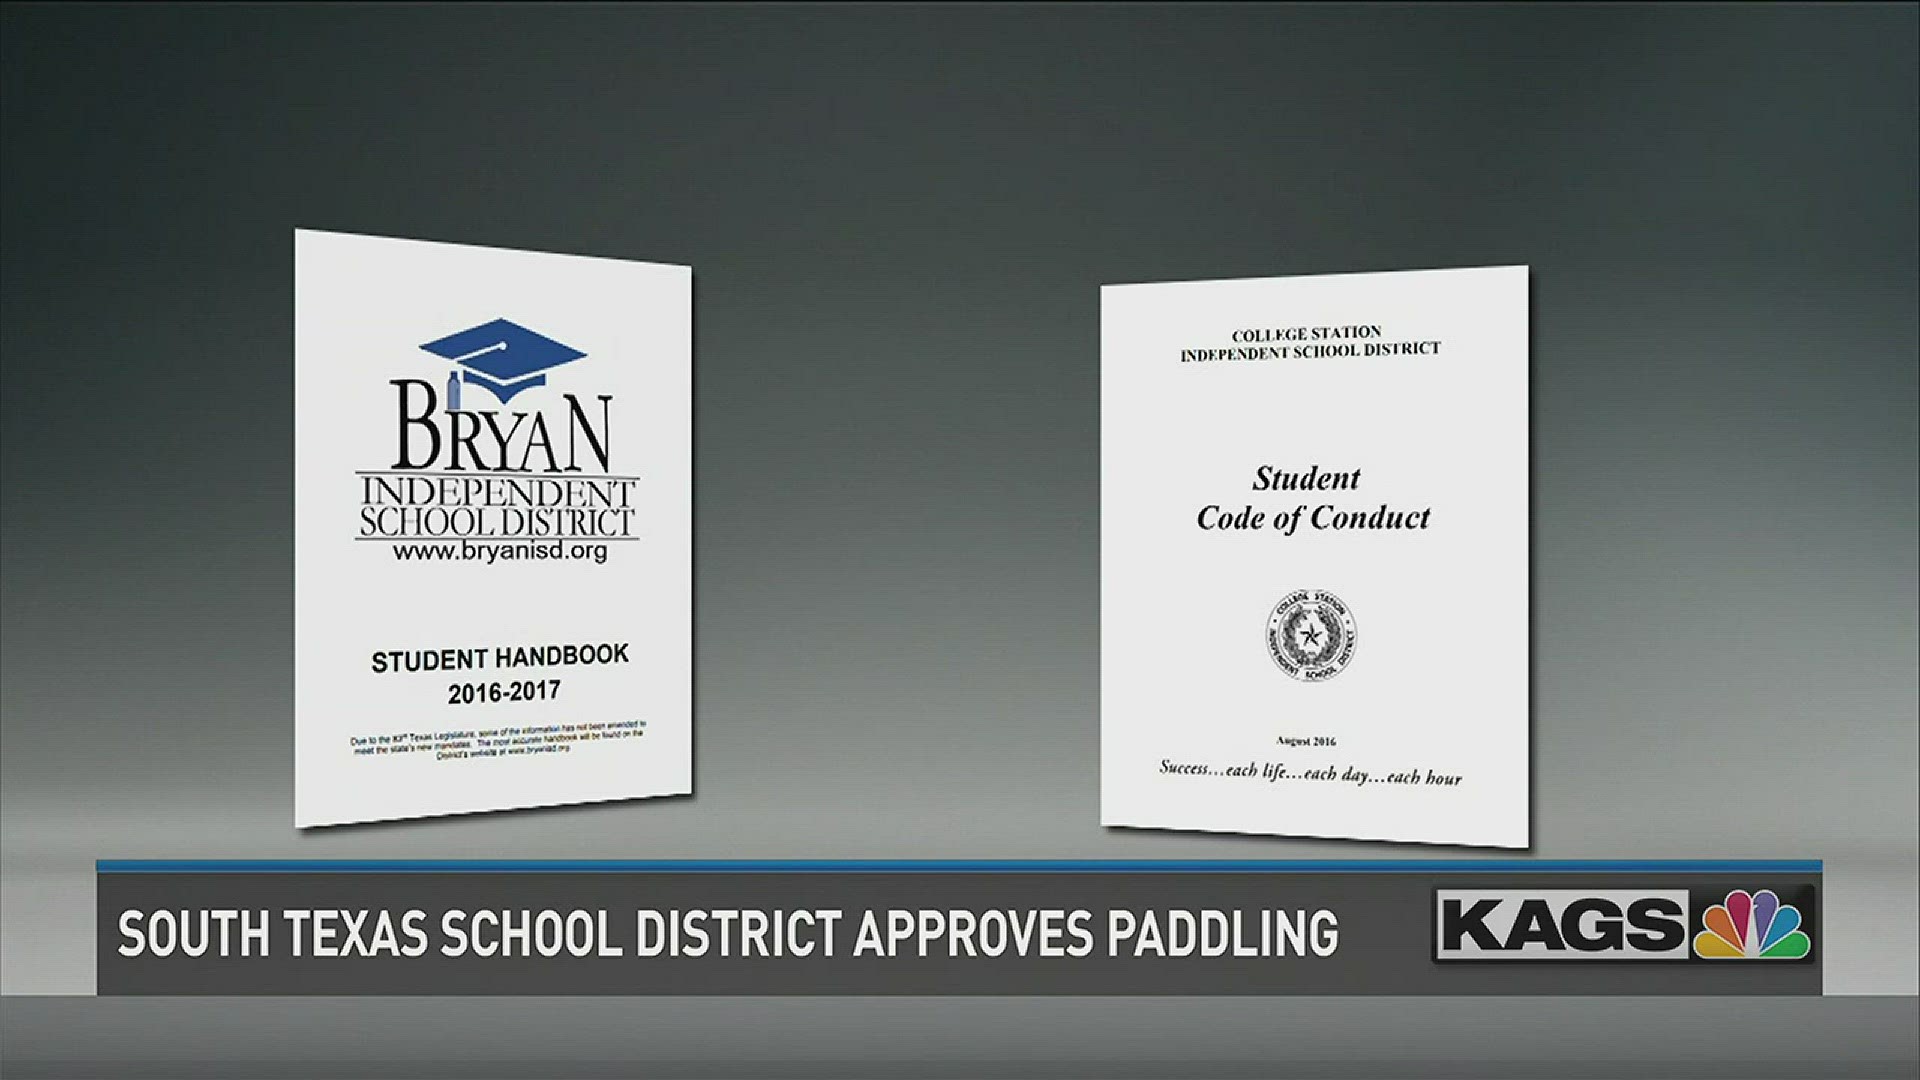 A South Texas school district approved paddling as a form of punishment. How do you feel about the policy?